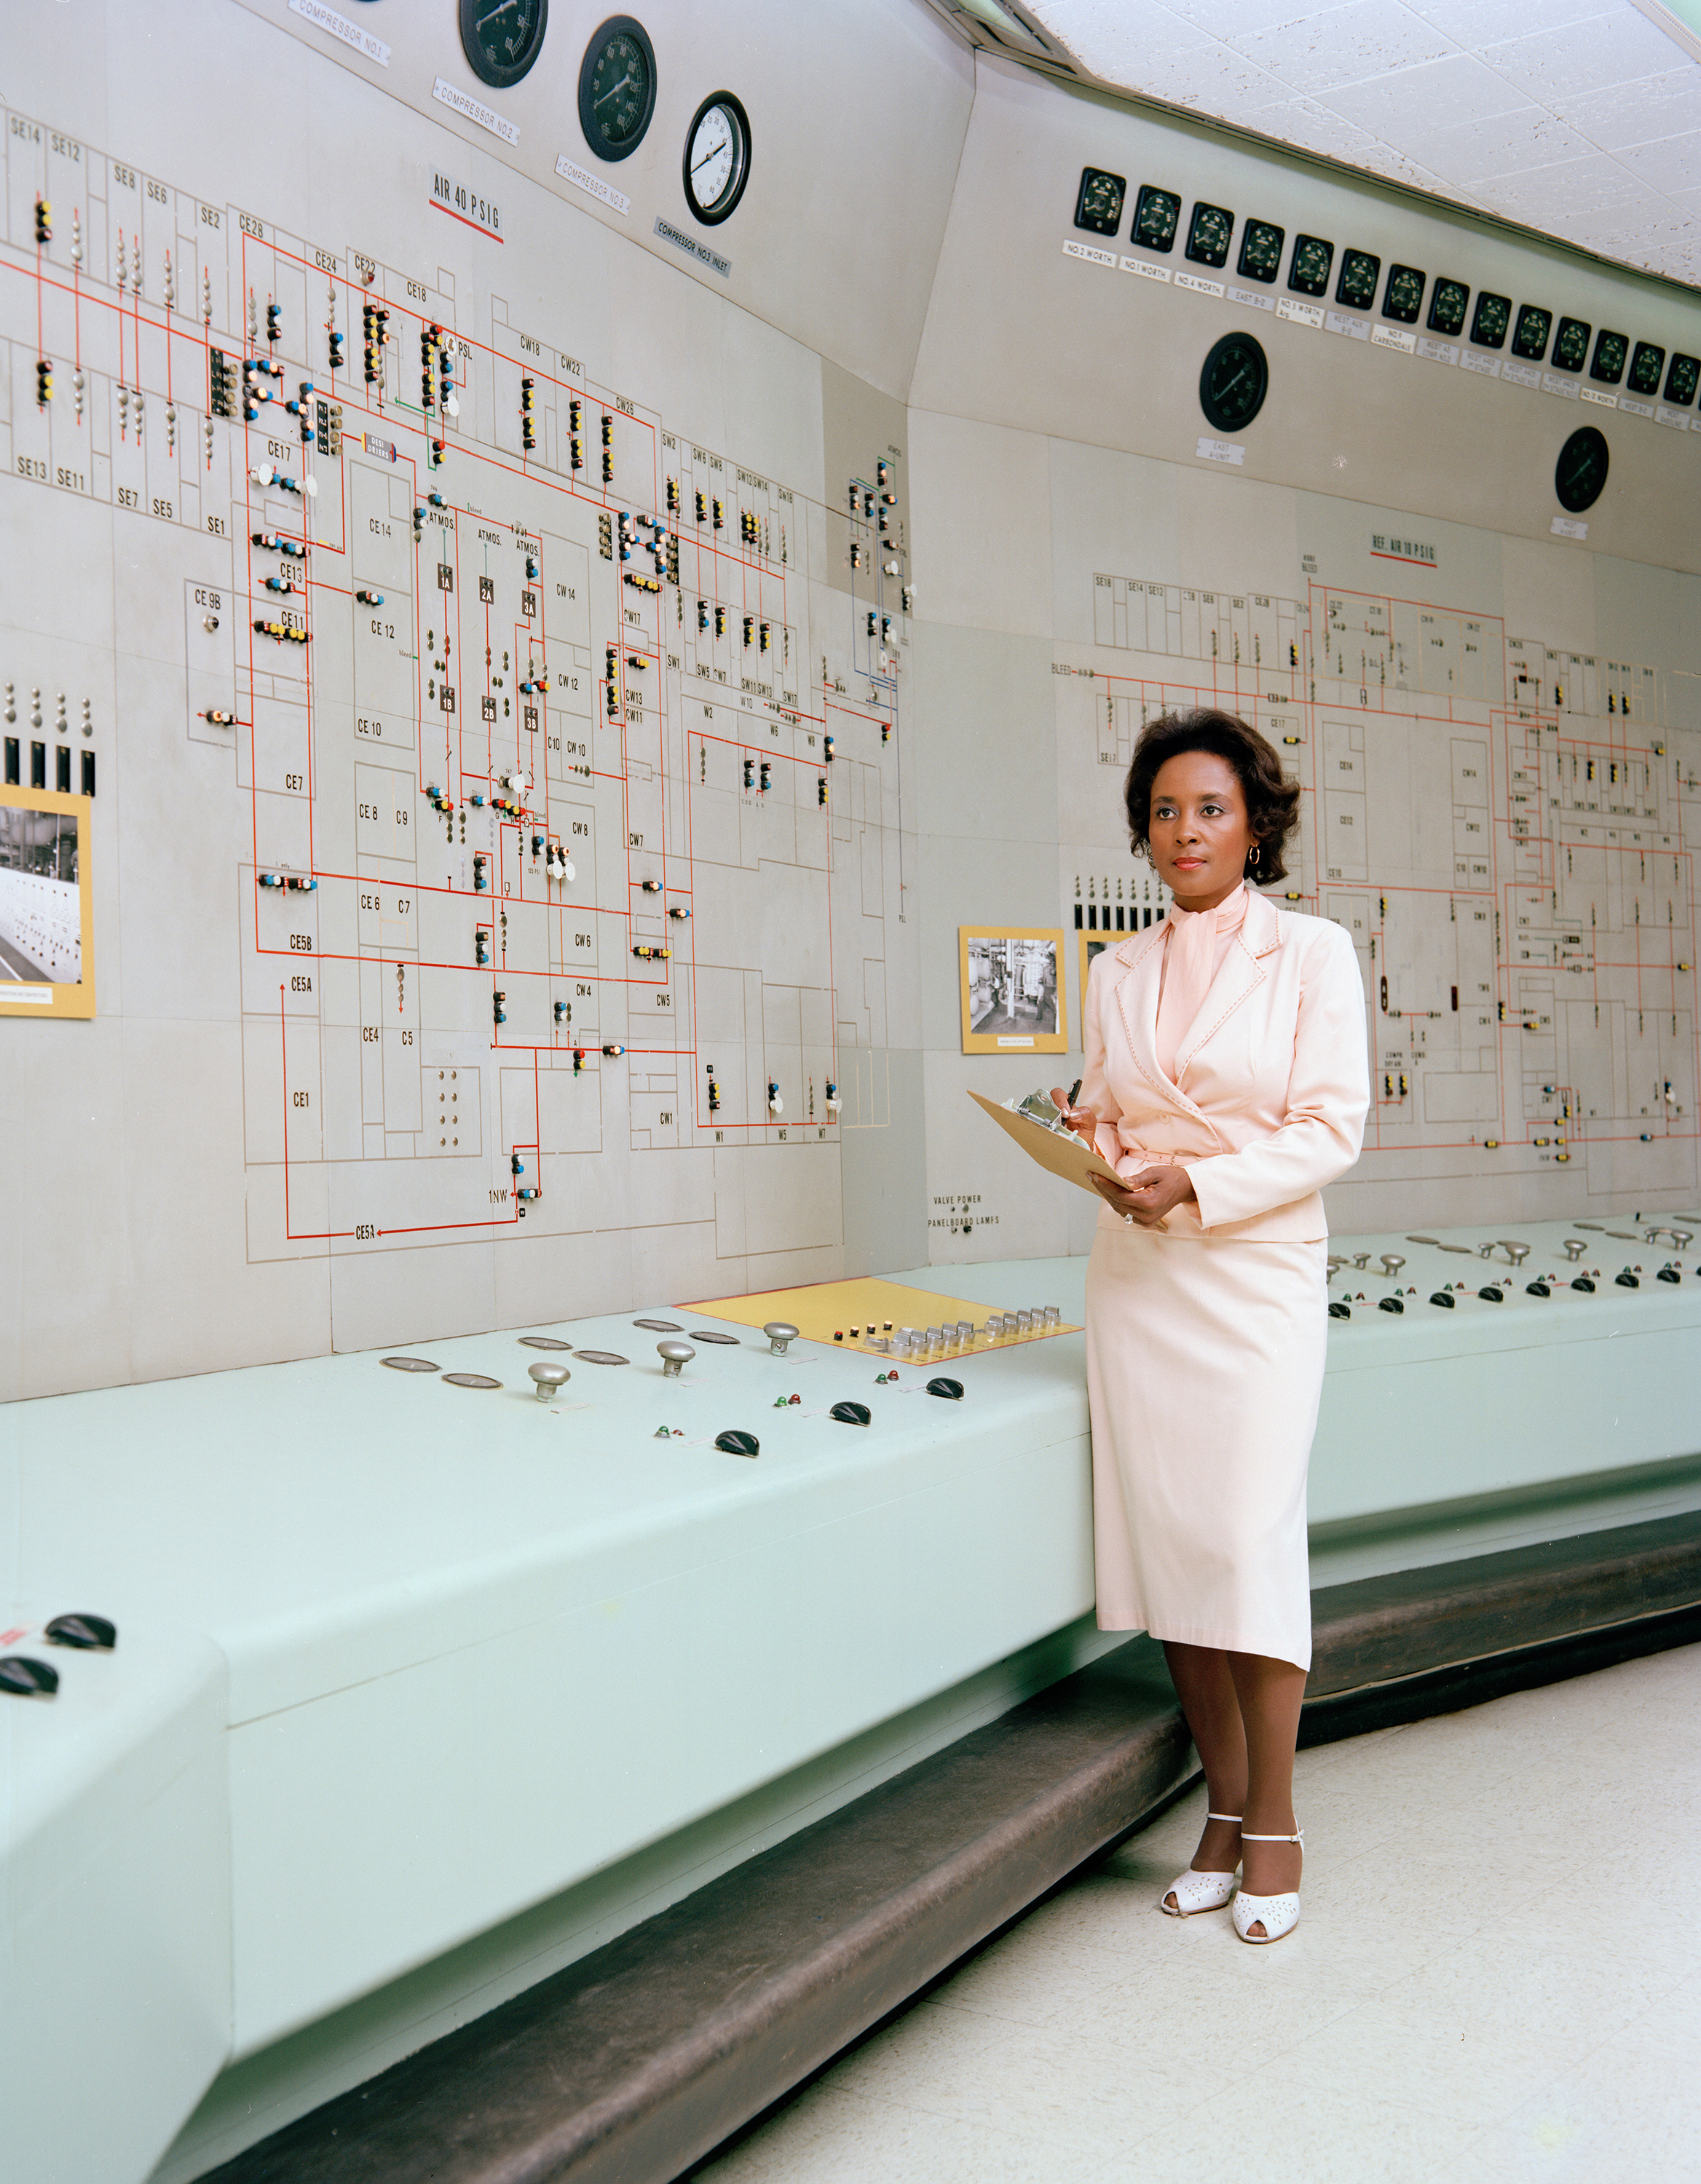 Annie Easley standing in a computer room